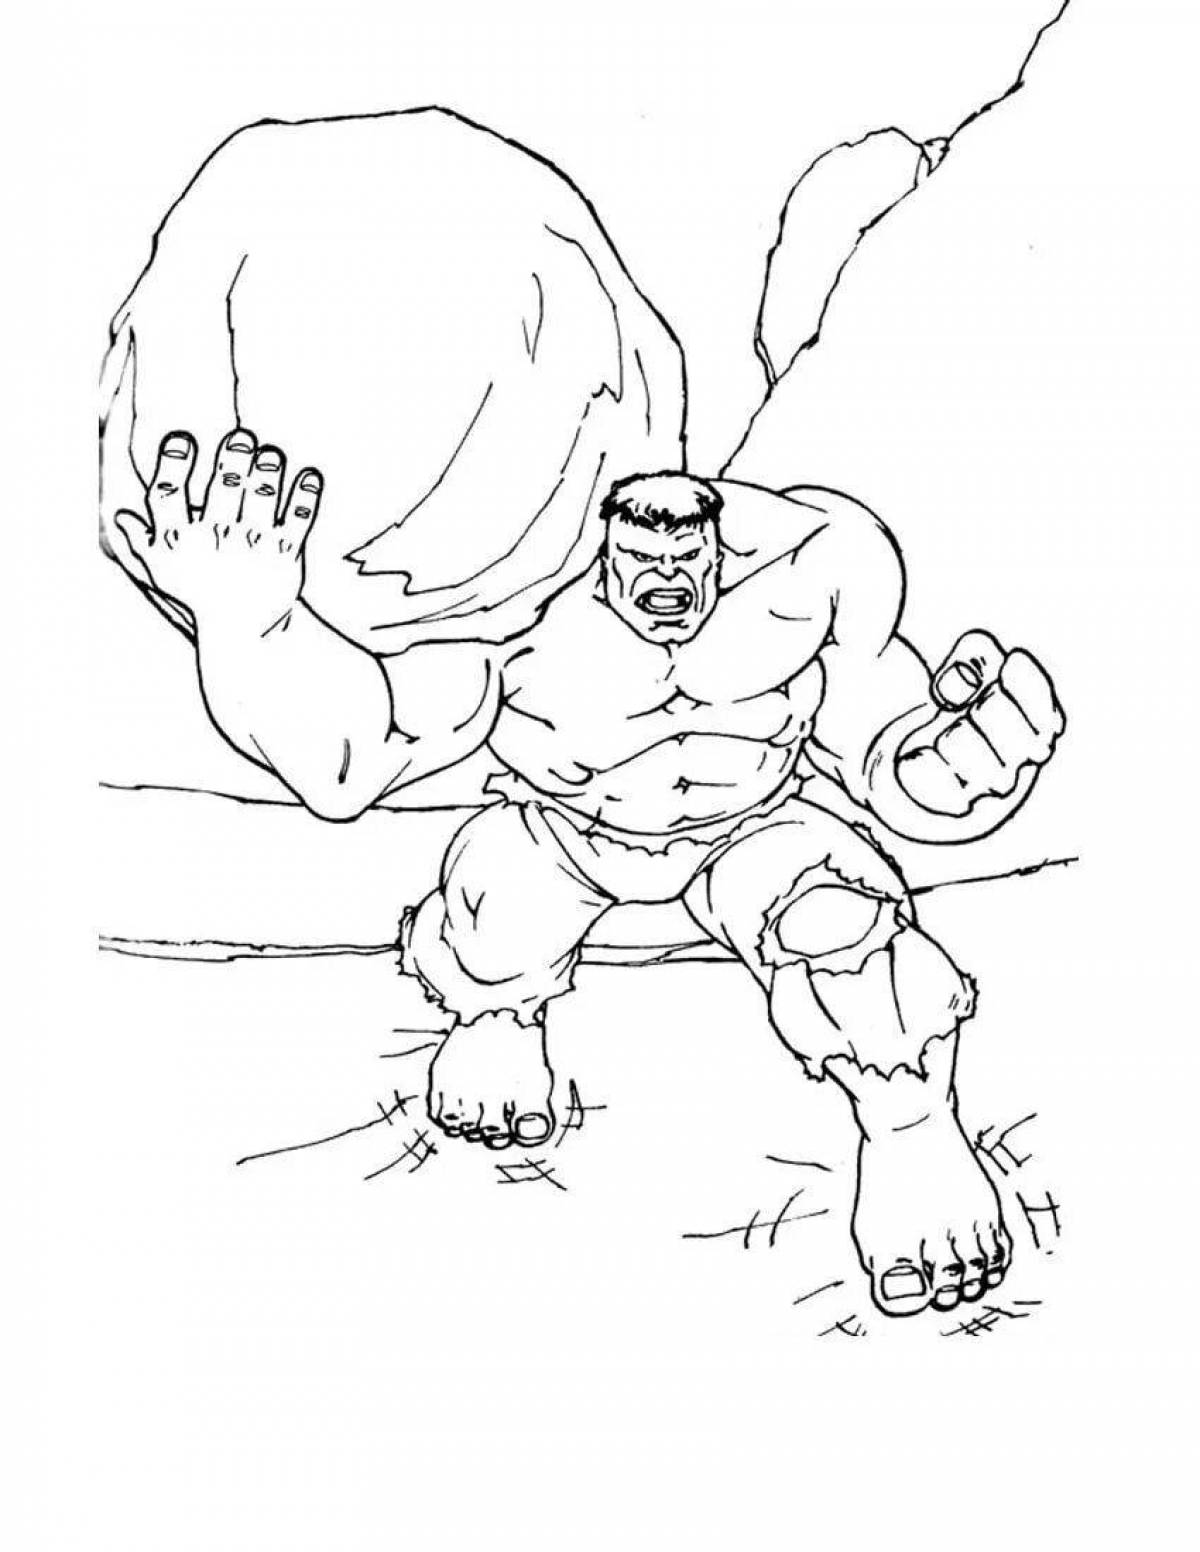 Hulk awesome coloring book